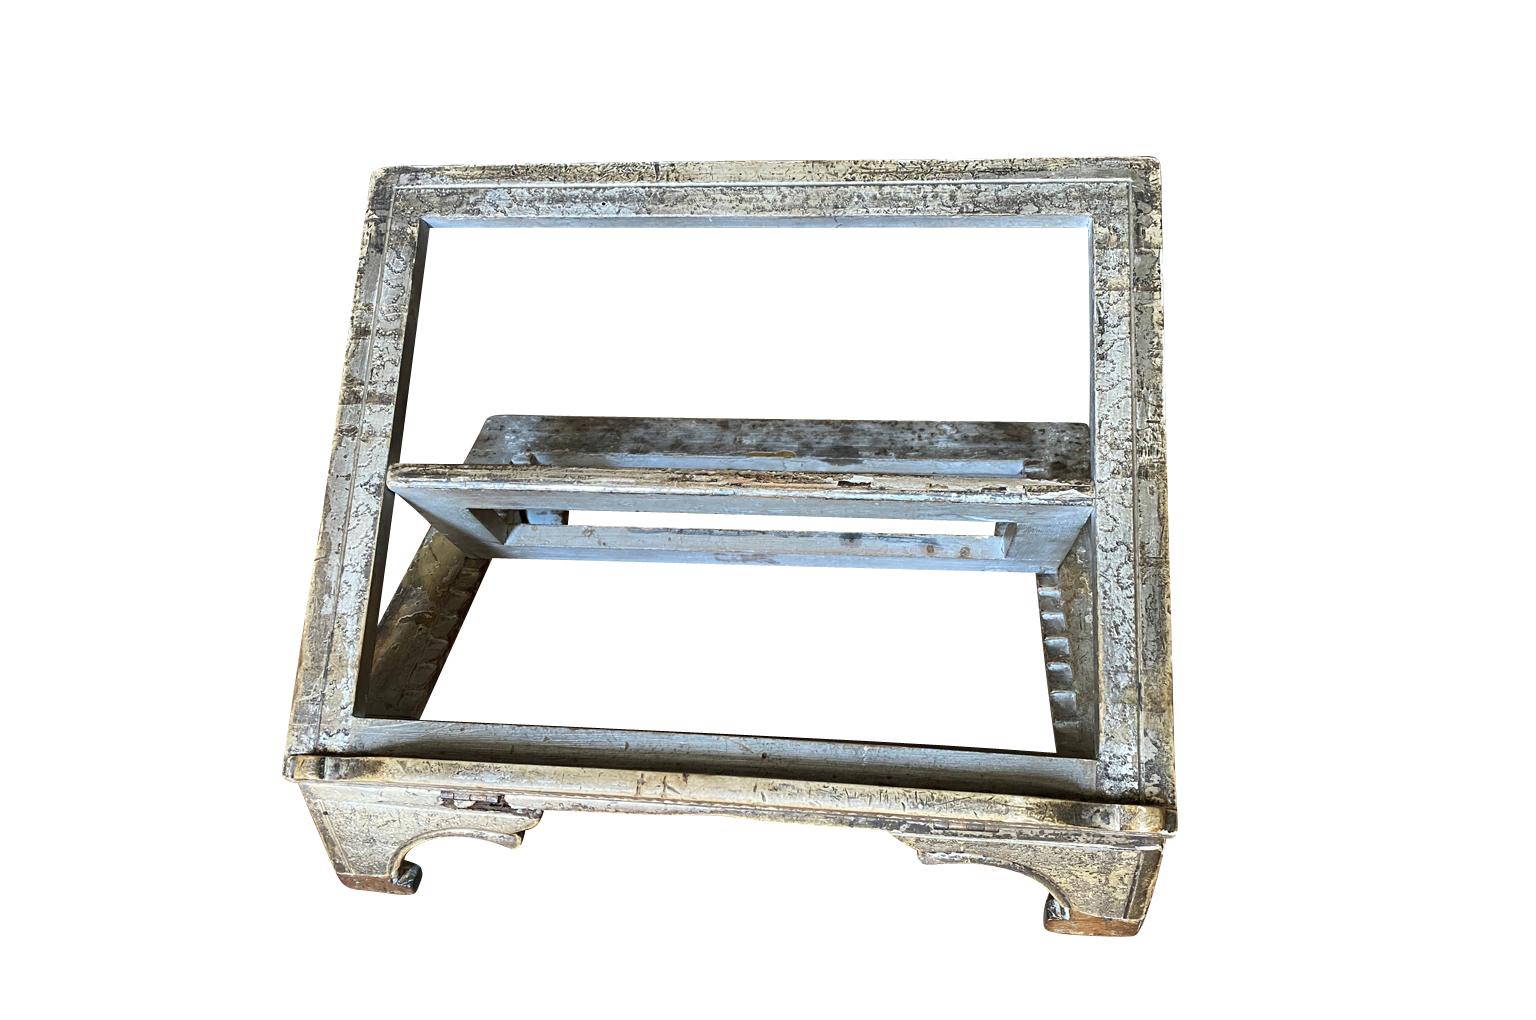 A very beautiful 18th century Porte Livre - Book Stand from the Tuscan region of Italy.  Wonderfully crafted from silver giltwood.  Not only perfect for displaying a book, but a small painting as well.